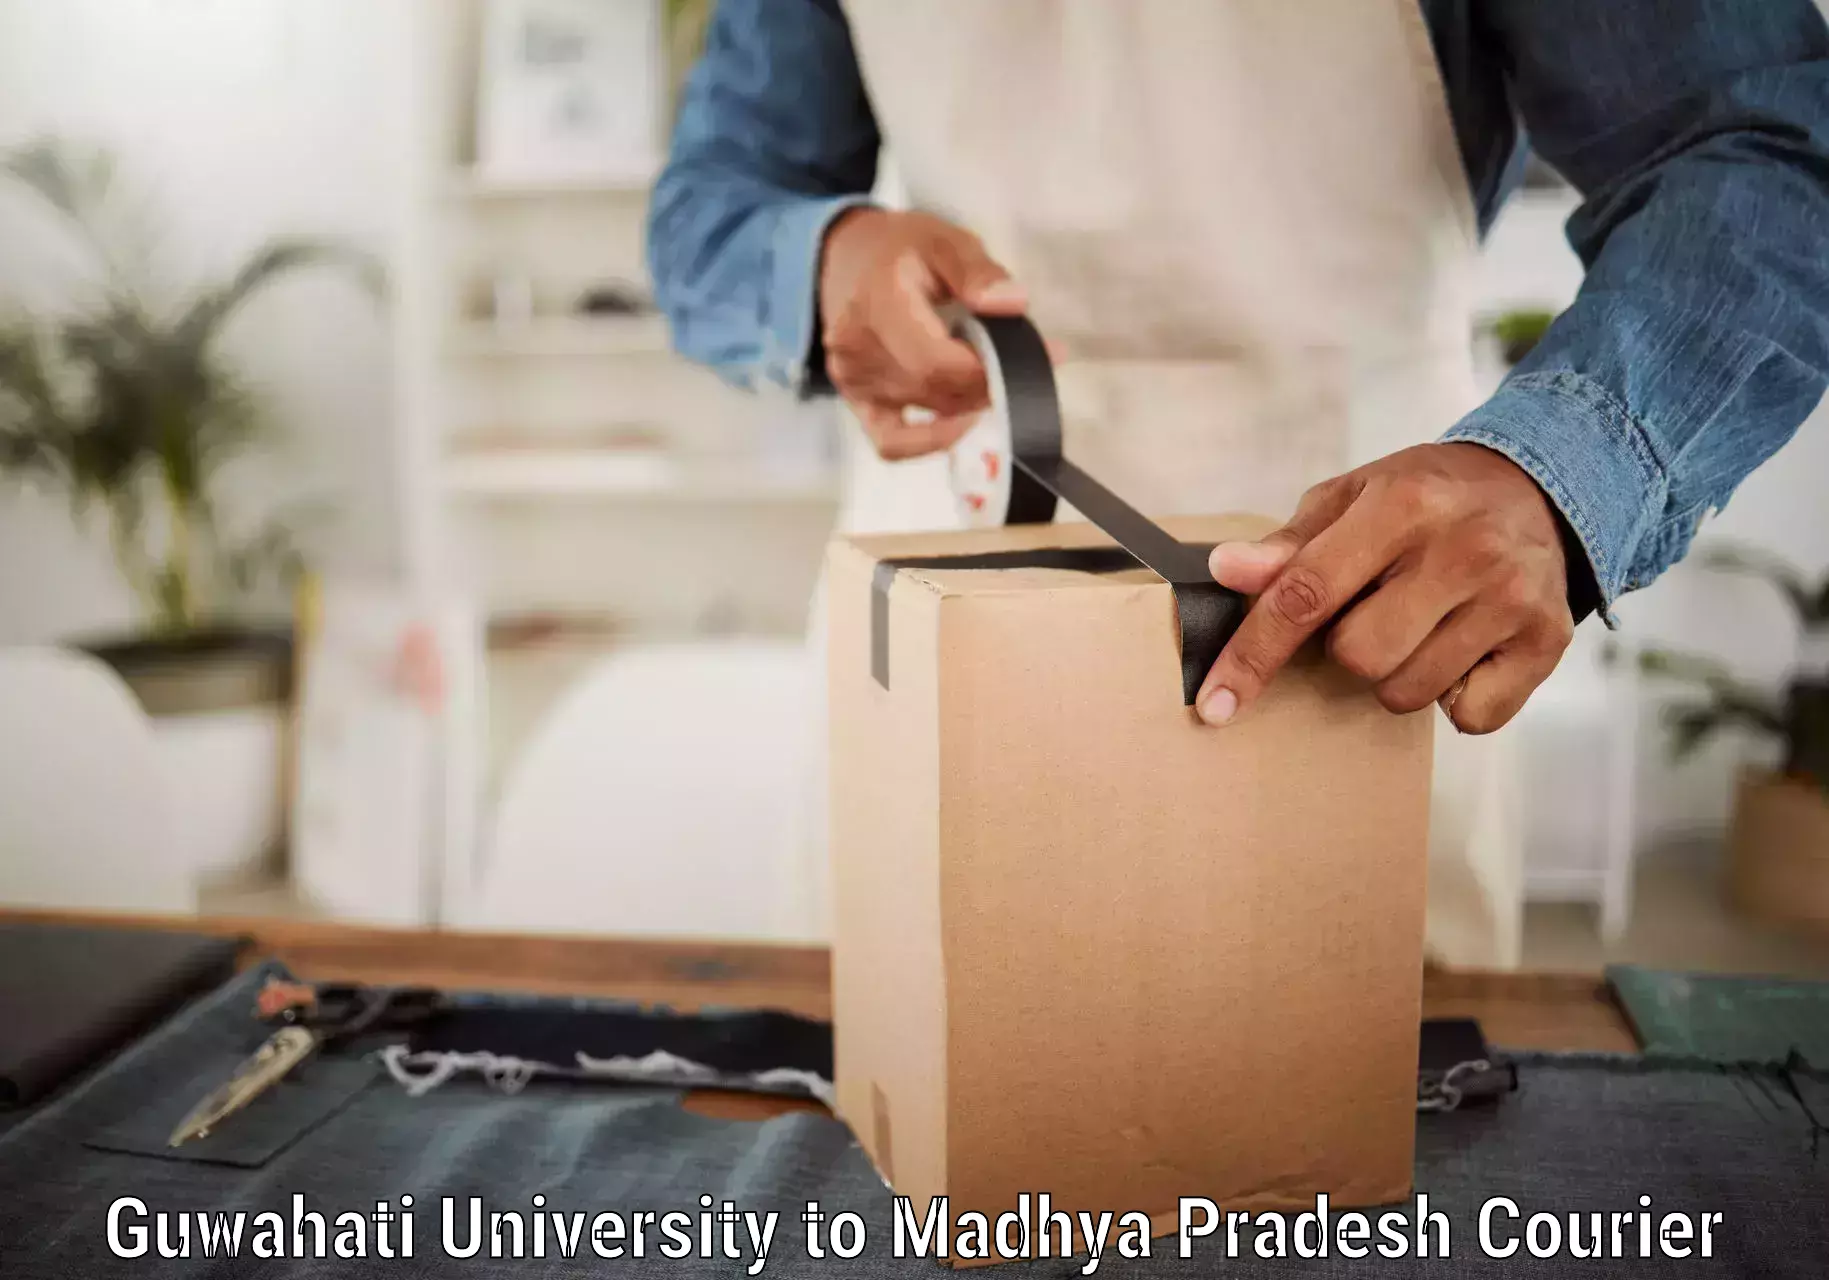 Fast-track shipping solutions Guwahati University to Dhamnod